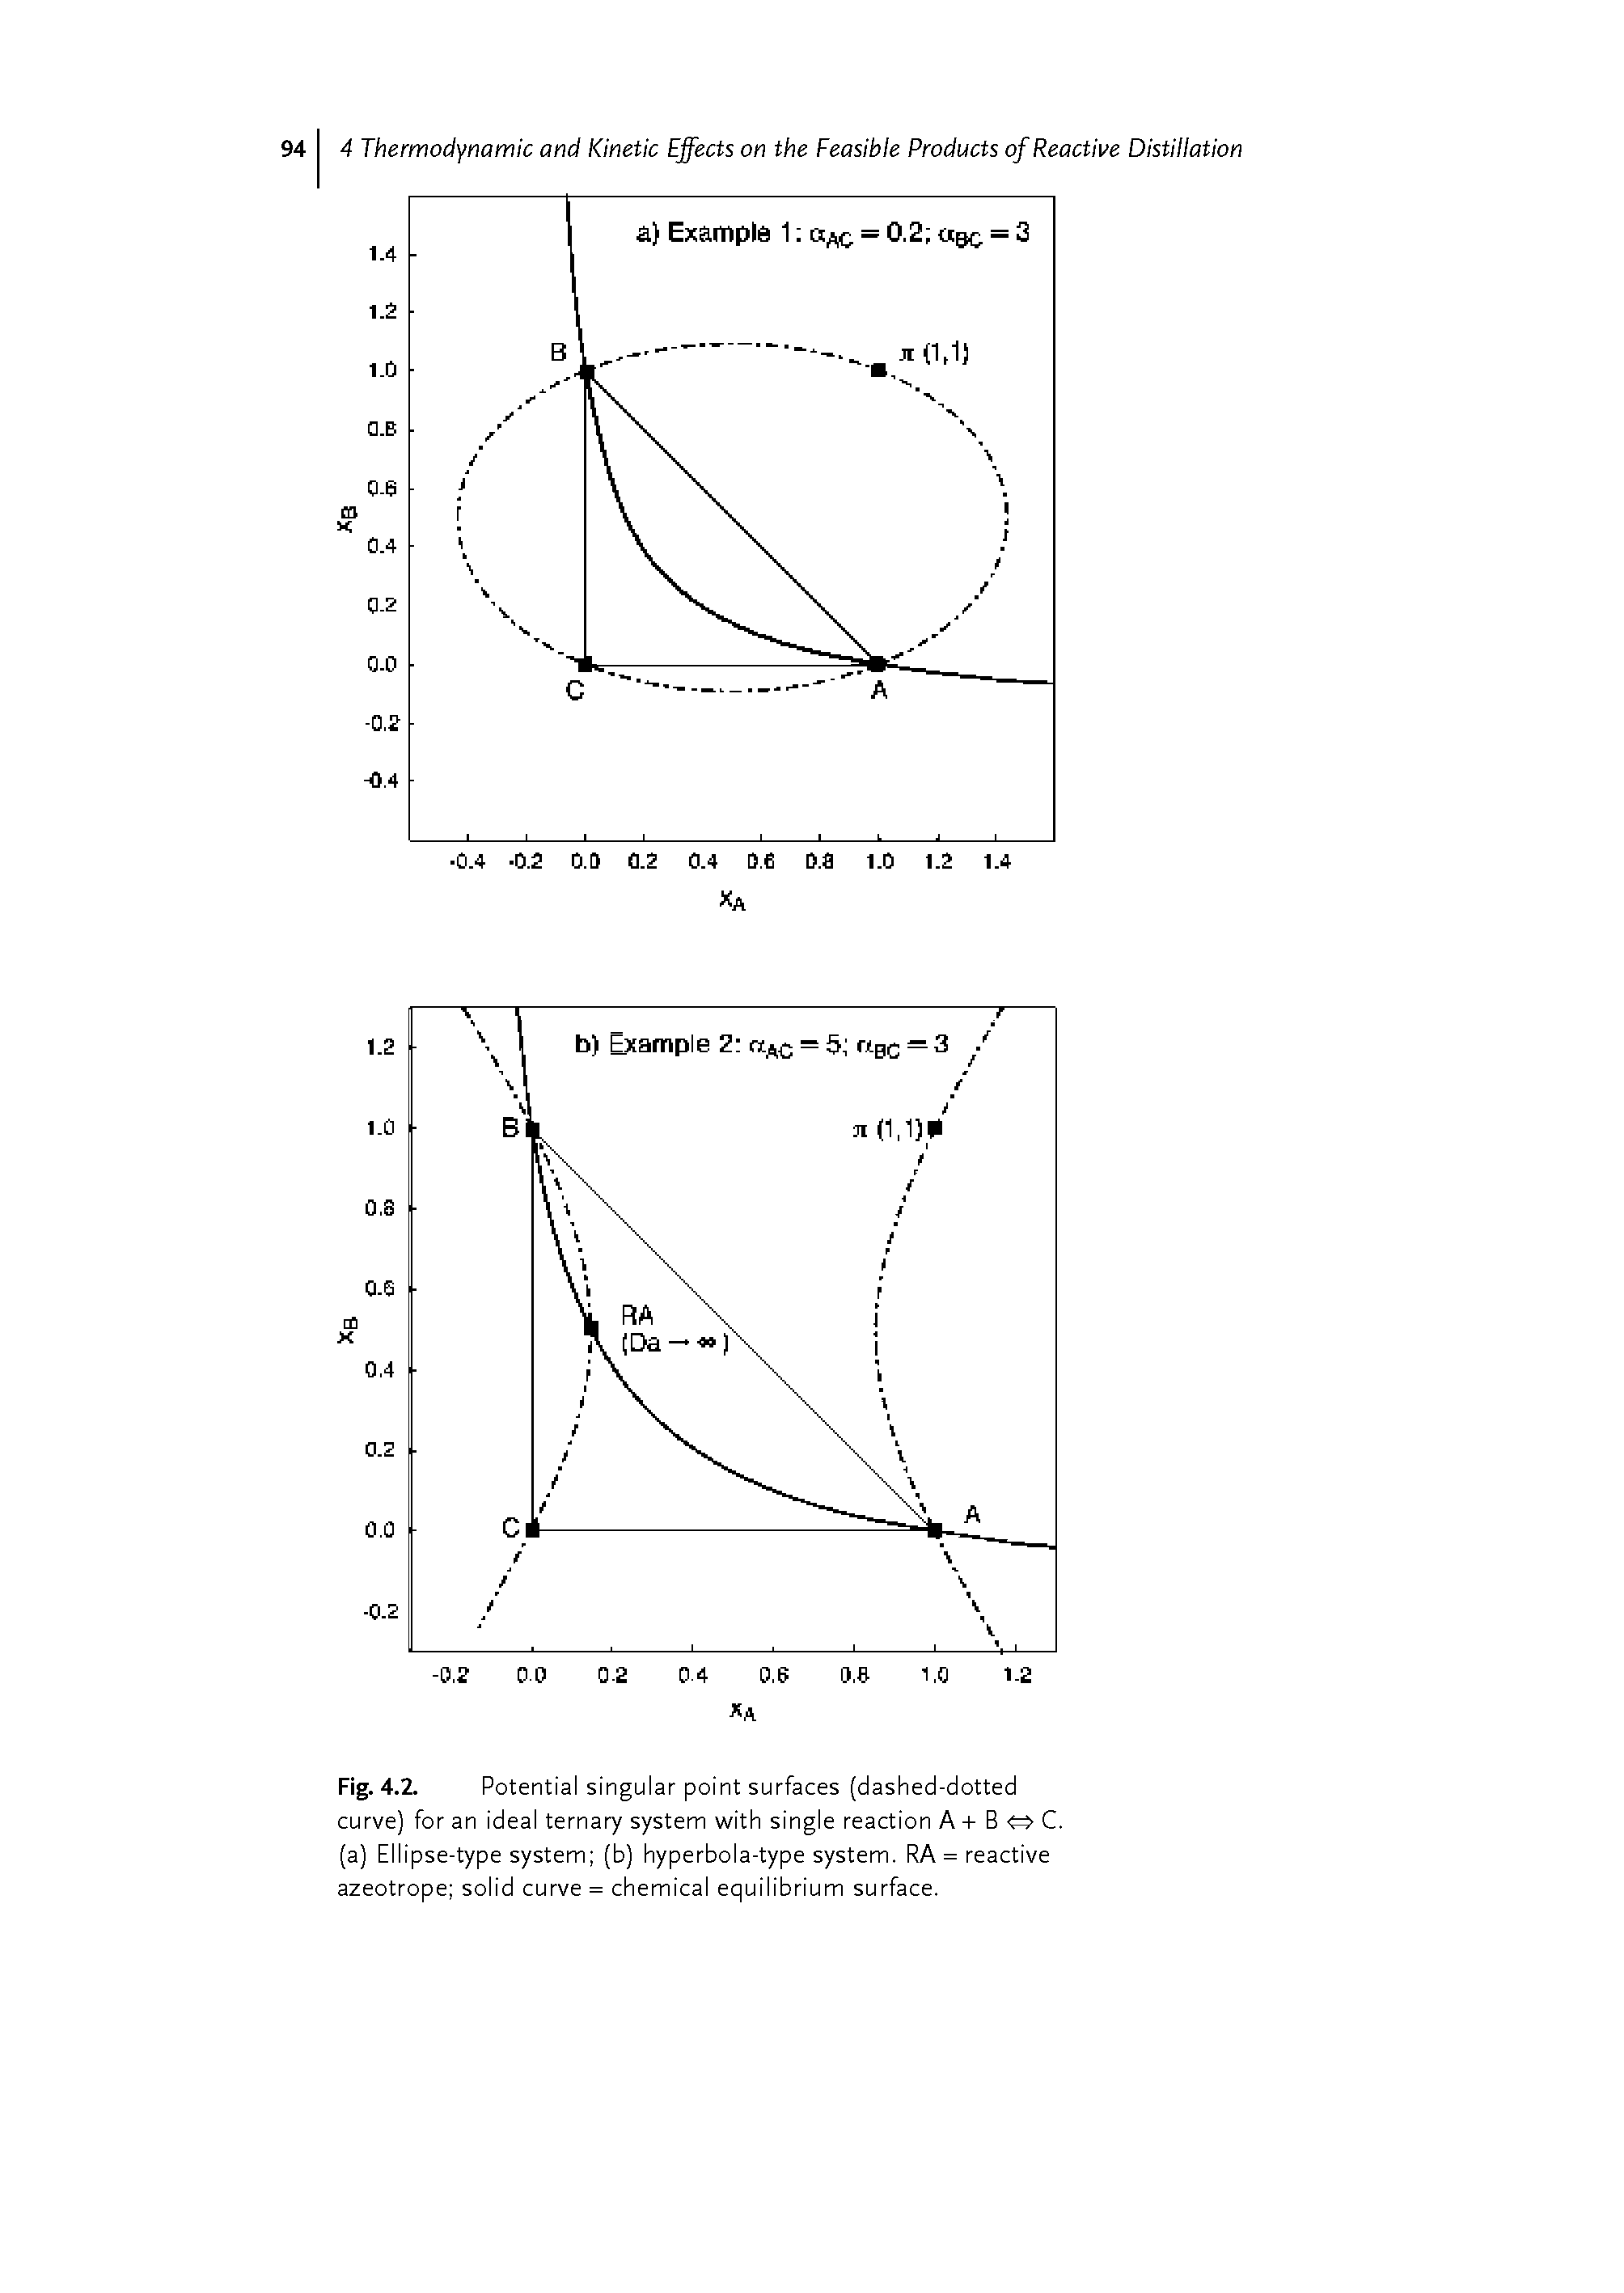 Fig. 4.2. Potential singular point surfaces (dashed-dotted curve) for an ideal ternary system with single reaction A + B C. (a) Ellipse-type system (b) hyperbola-type system. RA = reactive azeotrope solid curve = chemical equilibrium surface.